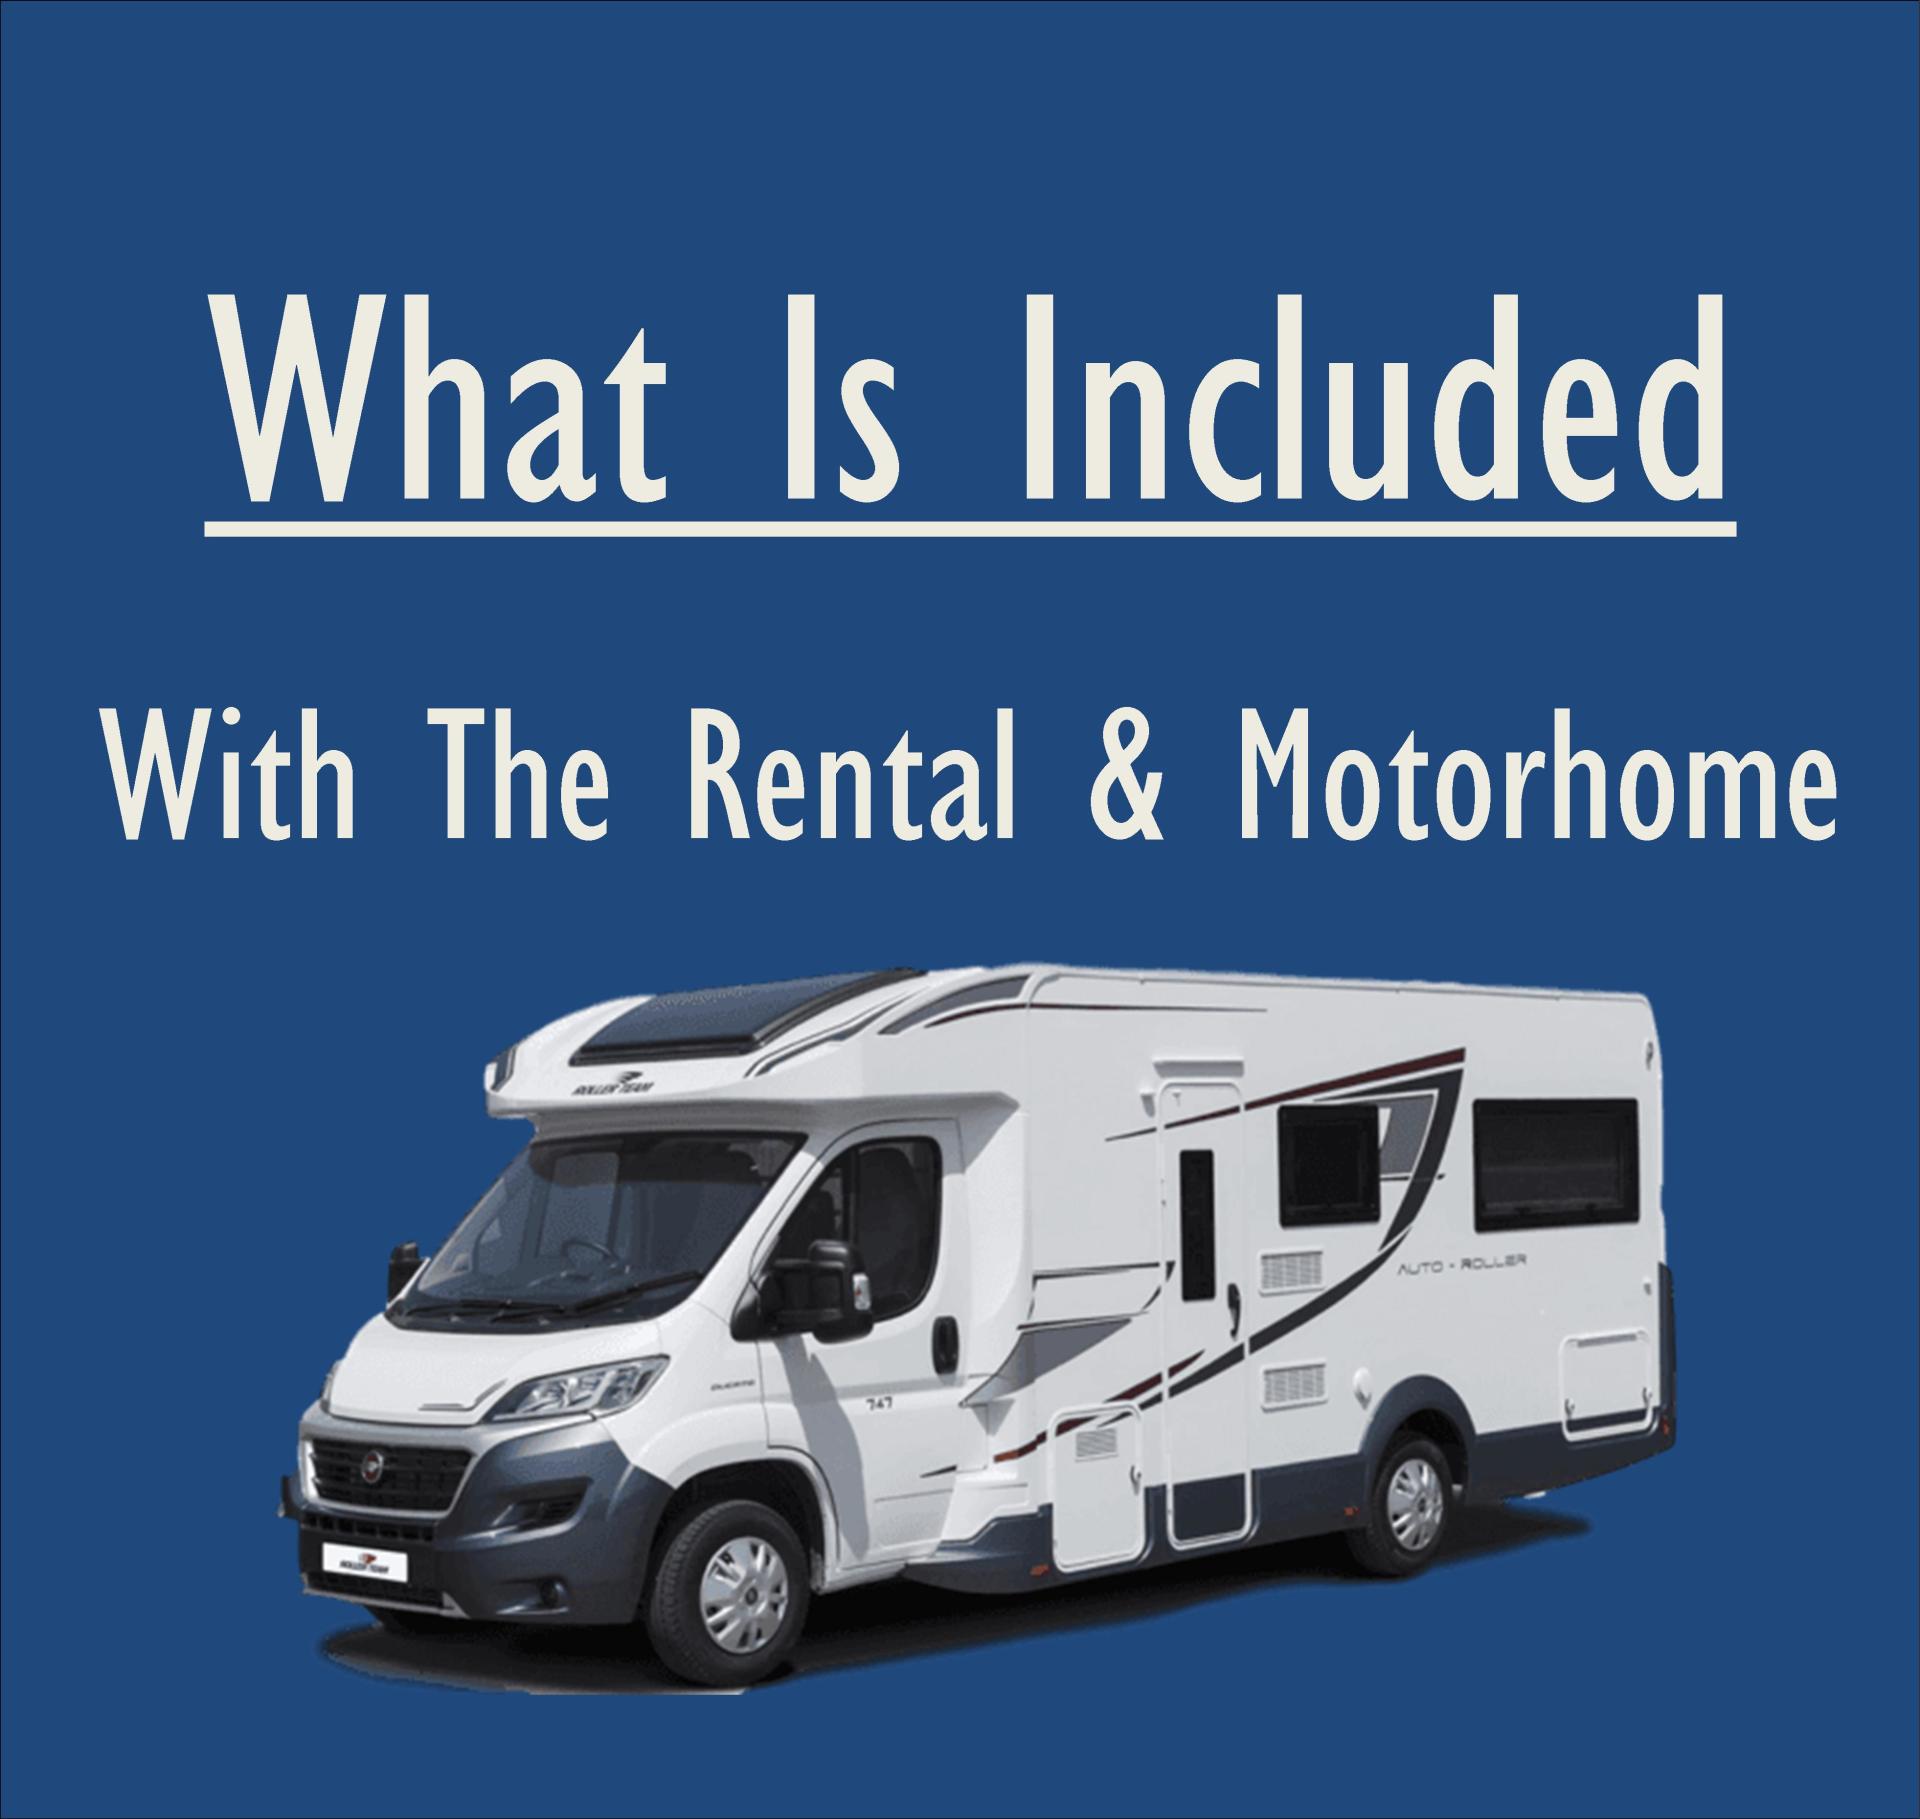 See what comes with this rental motorthome